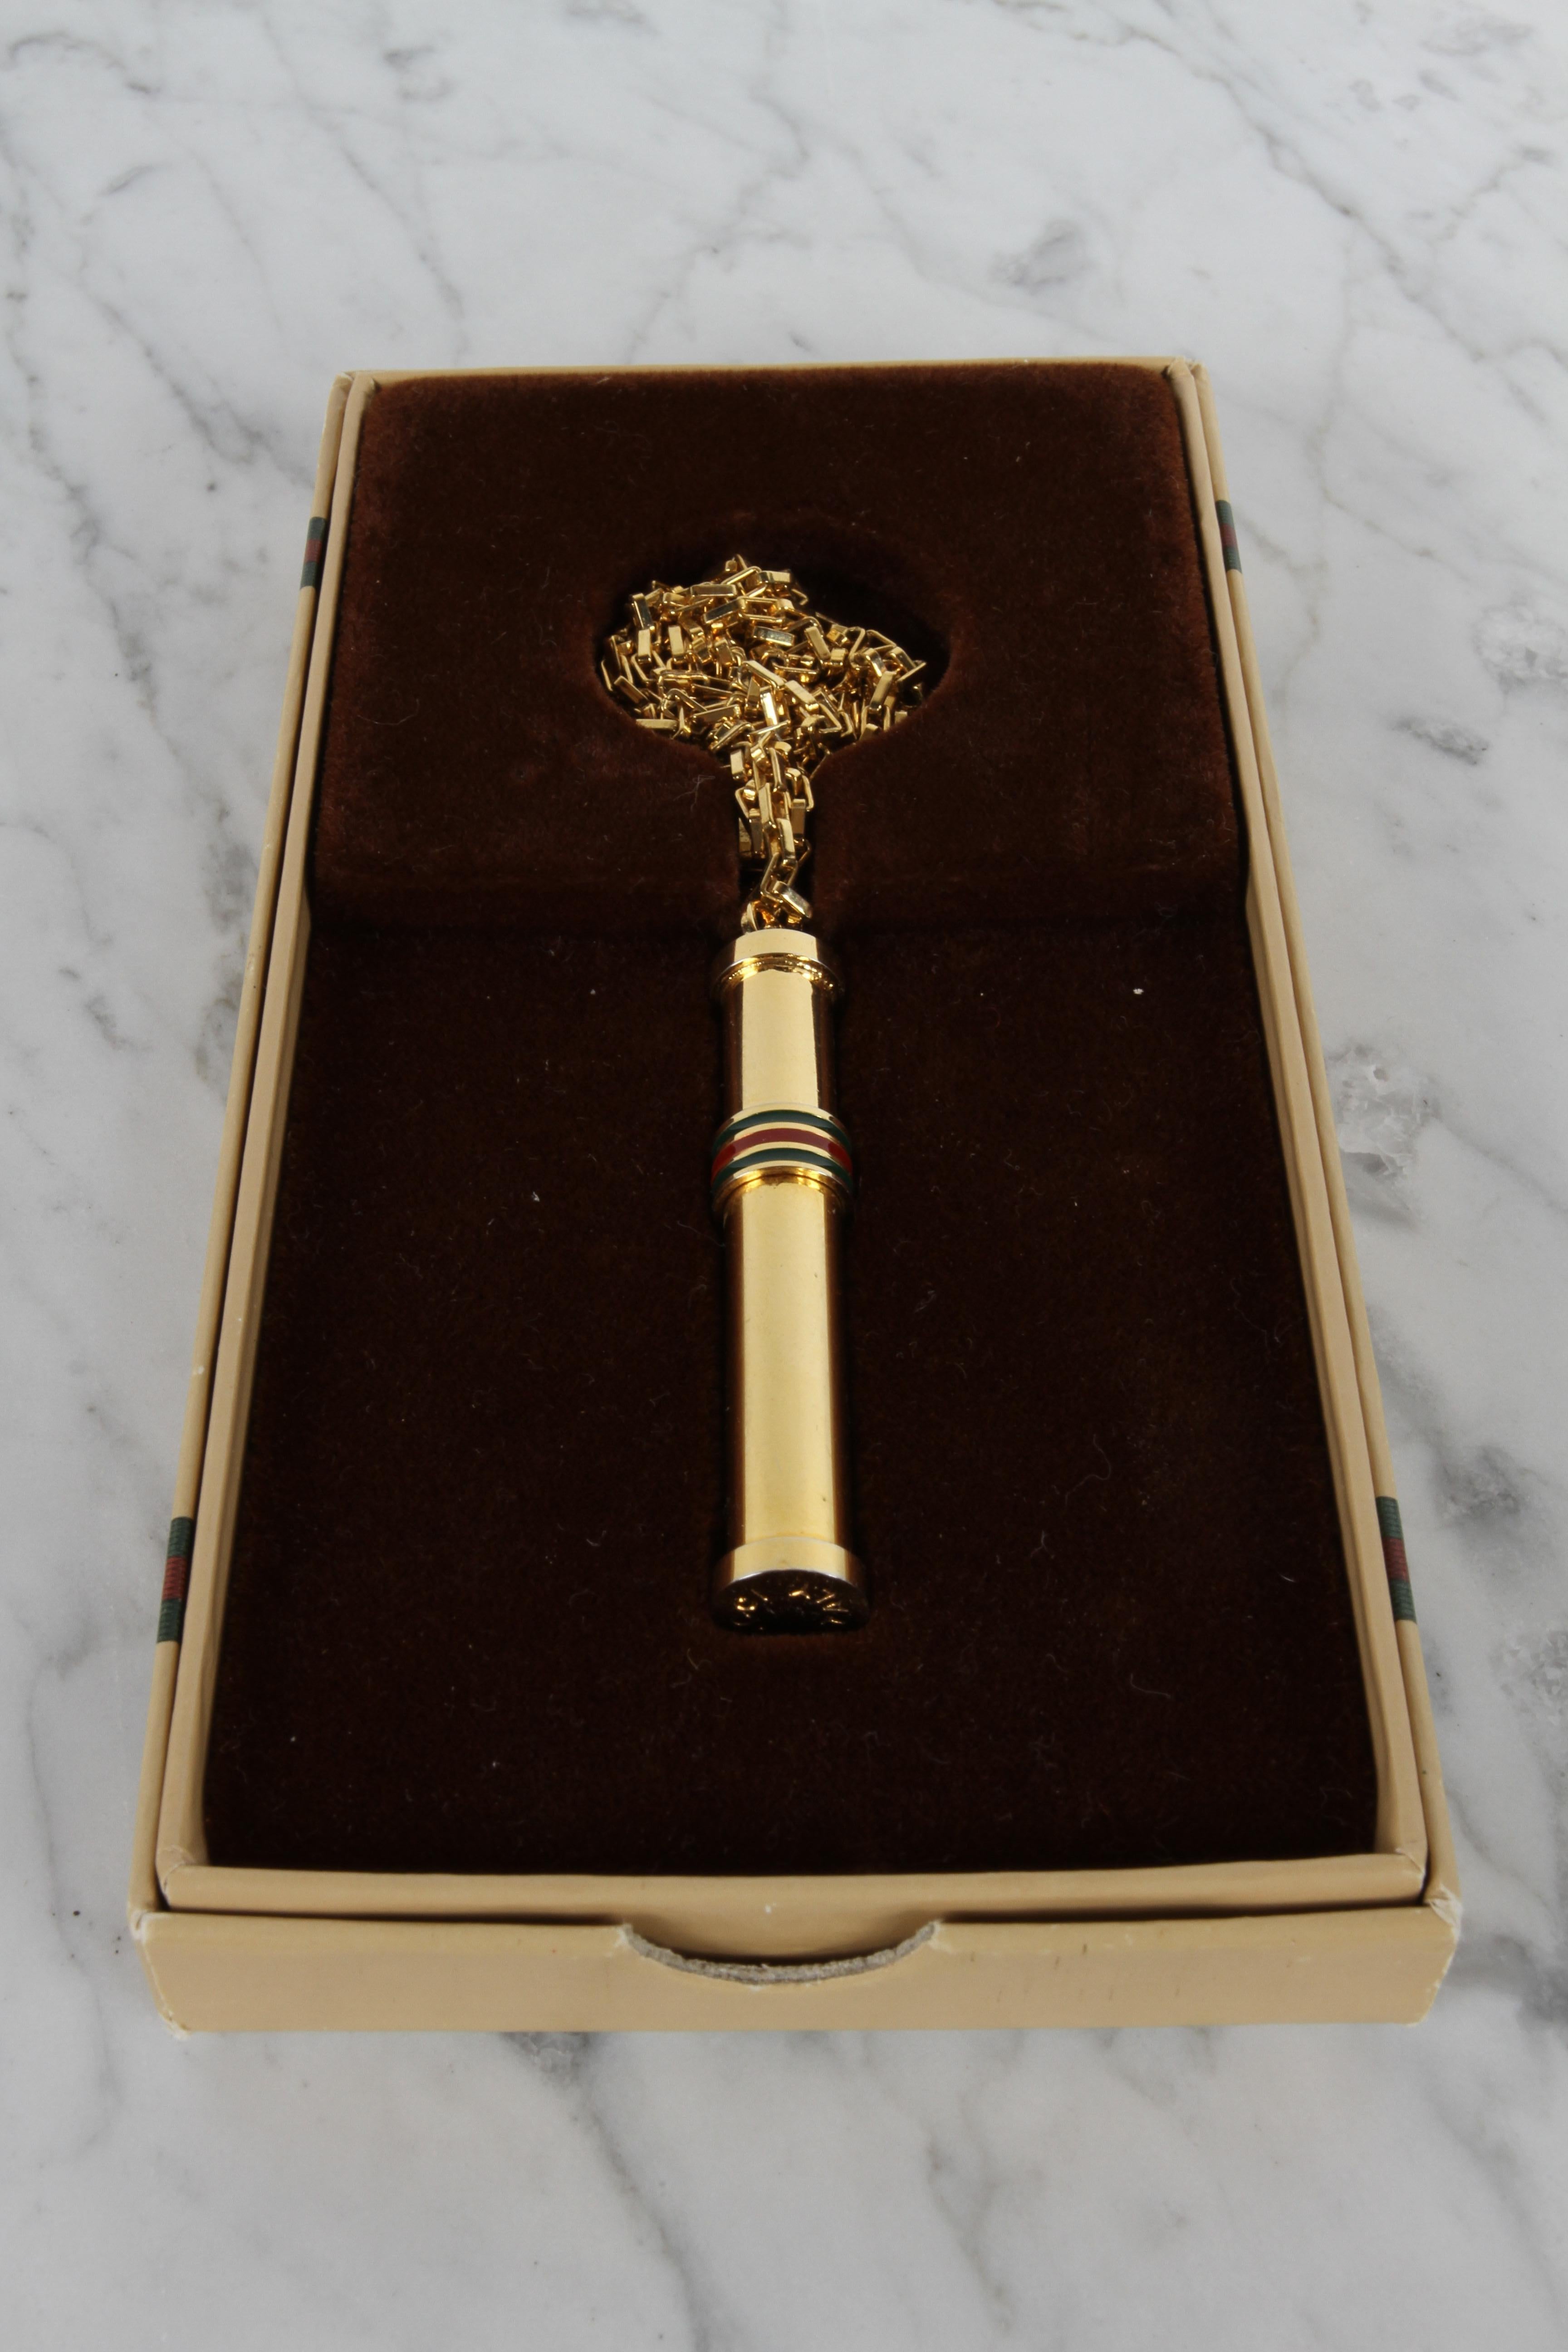 1980s Vintage GUCCI Gold Plated Necklace Perfume Bottle Stick Pendant NOS in Box In Excellent Condition For Sale In St. Louis, MO